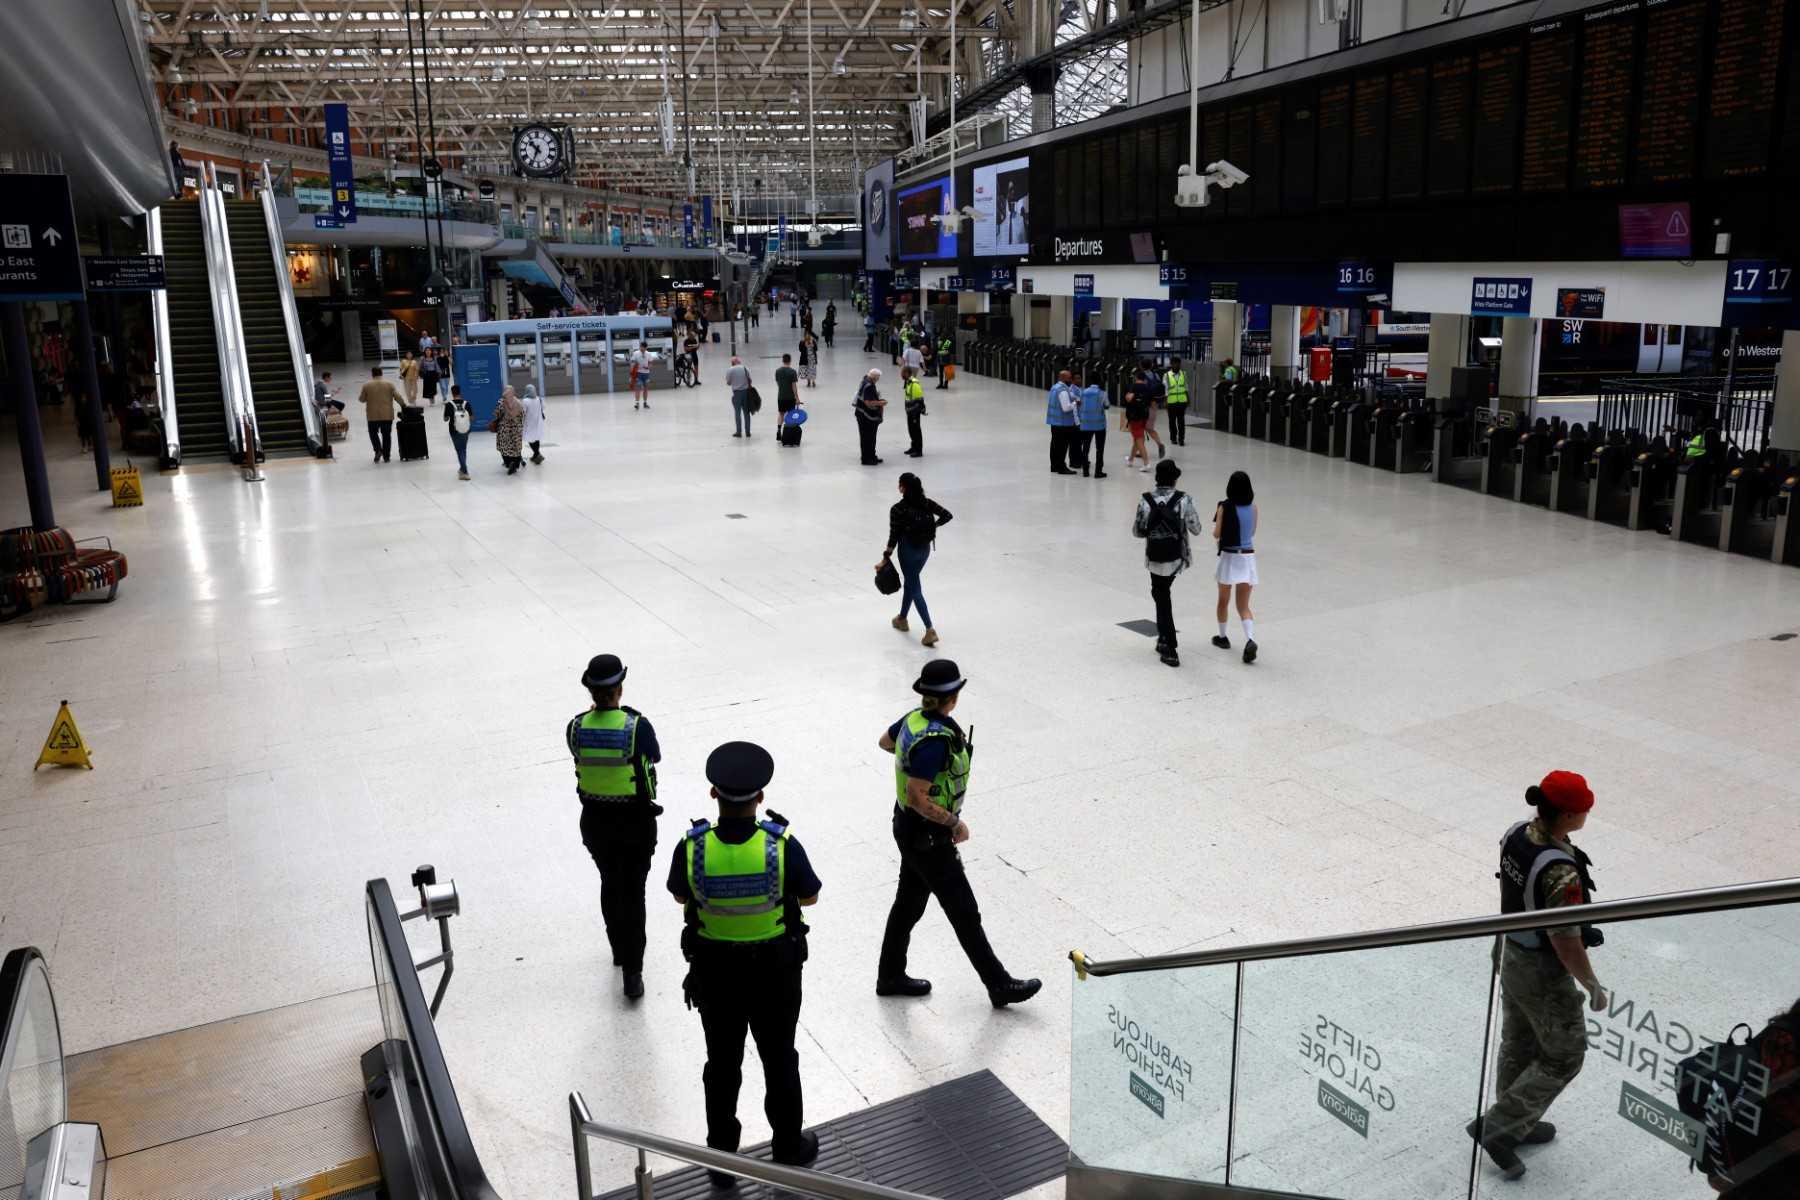 Police officers patrol at Waterloo Station in London on Aug 18, as Britain's train network faces further heavy disruption in major walkouts that follow the sector's biggest strike action for 30 years already this summer. Photo: AFP